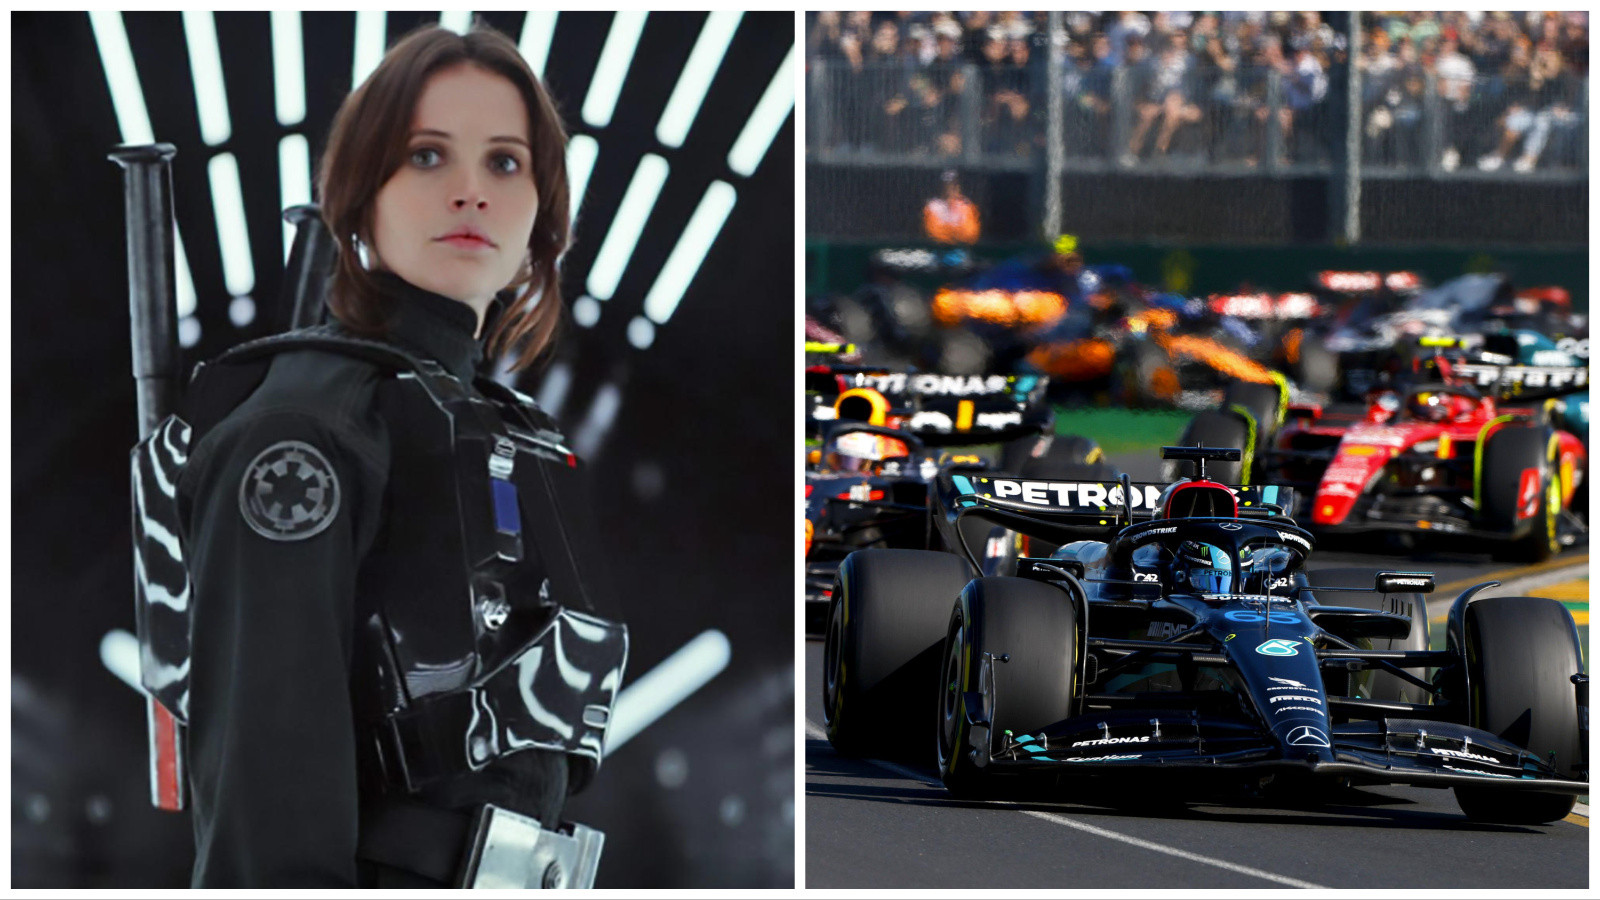 Star Wars star Felicity Jones set for starring role in 'One' - an F1 drama.